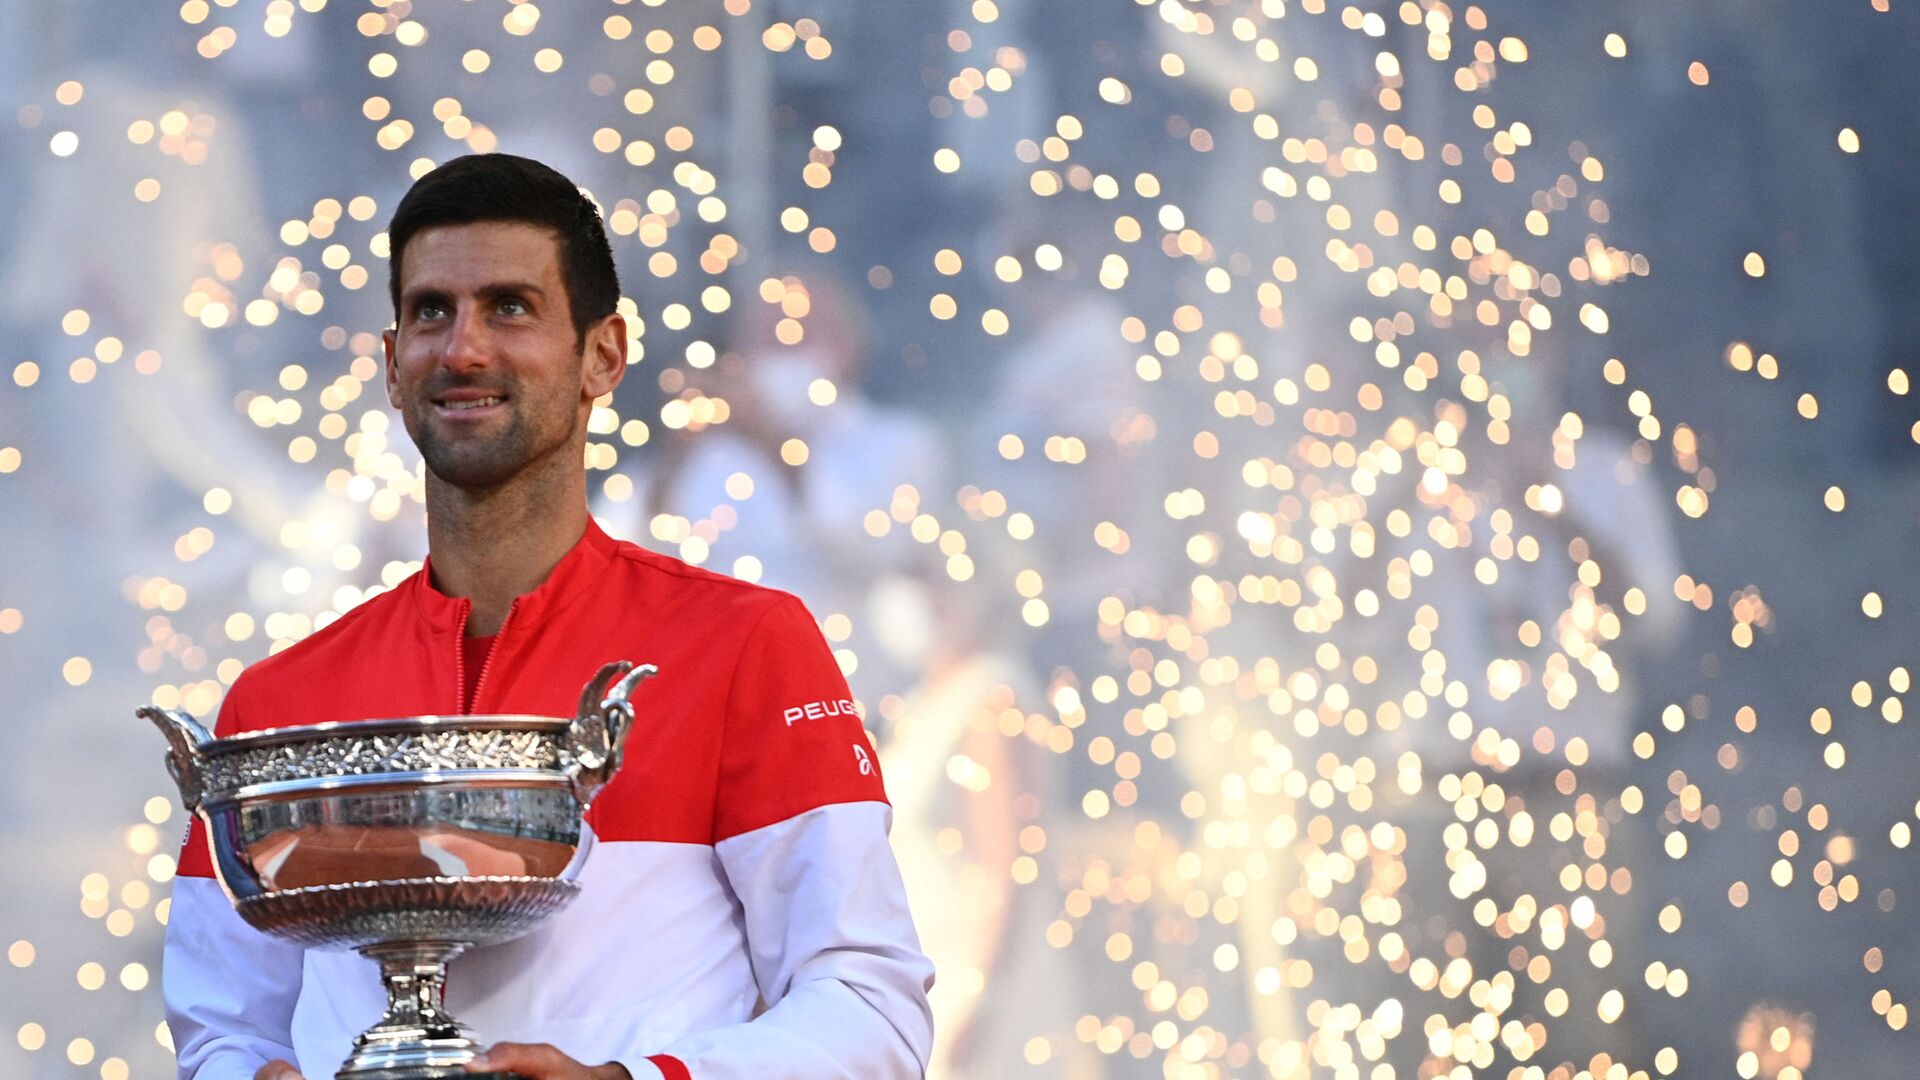 Serbia's Novak Djokovic poses with The Mousquetaires Cup (The Musketeers) after winning against Greece's Stefanos Tsitsipas at the end of their men's final tennis match on Day 15 of The Roland Garros 2021 French Open tennis tournament in Paris on June 13, 2021. - Sputnik International, 1920, 16.07.2021